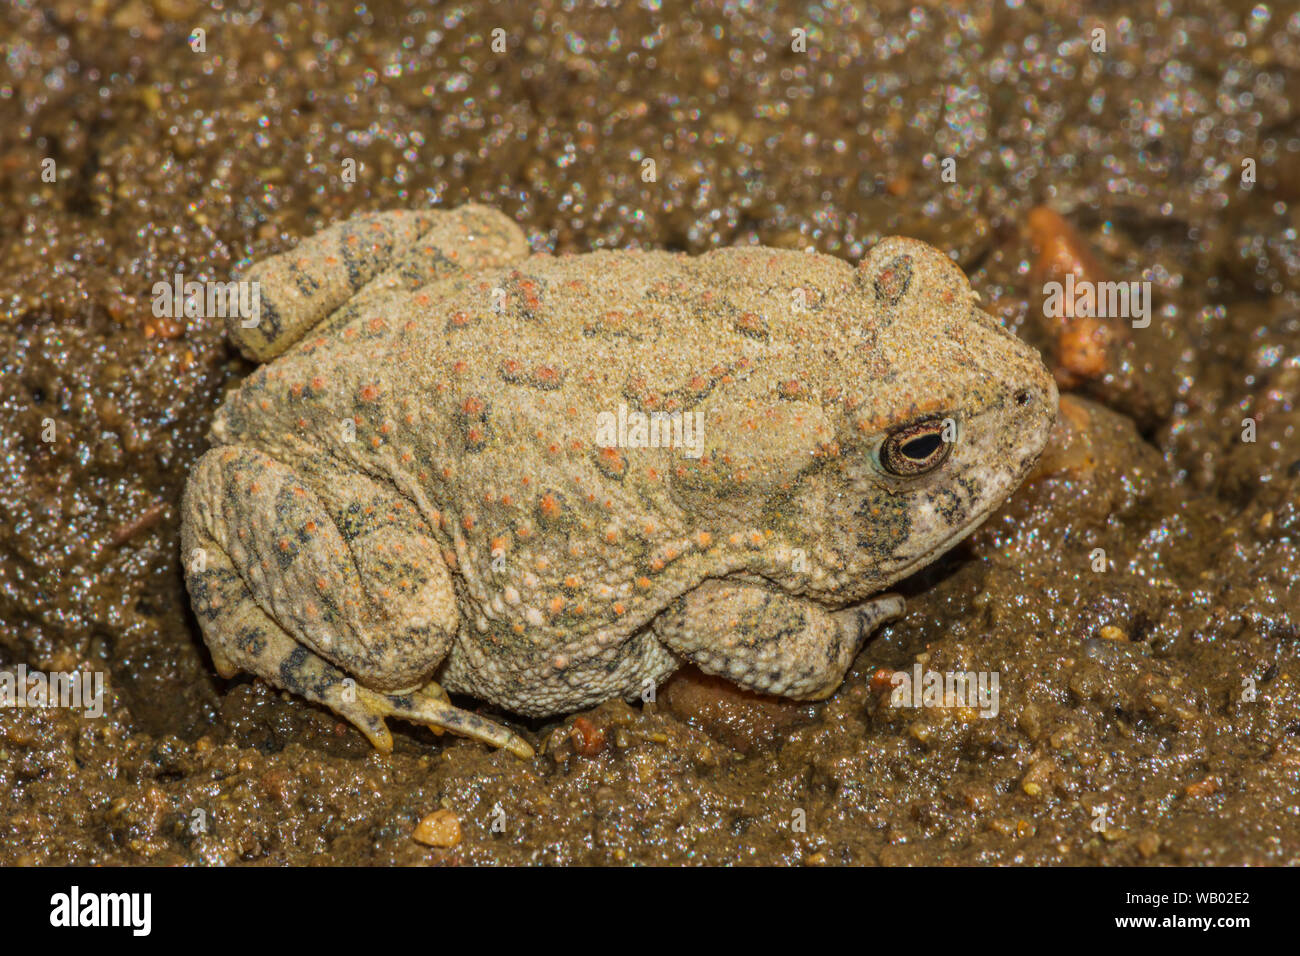 Tiny young Woodhouse's toad barely one inch in length sits along shoreline of East Plum Creek, Castle Rock Colorado US. Photo taken in August. Stock Photo